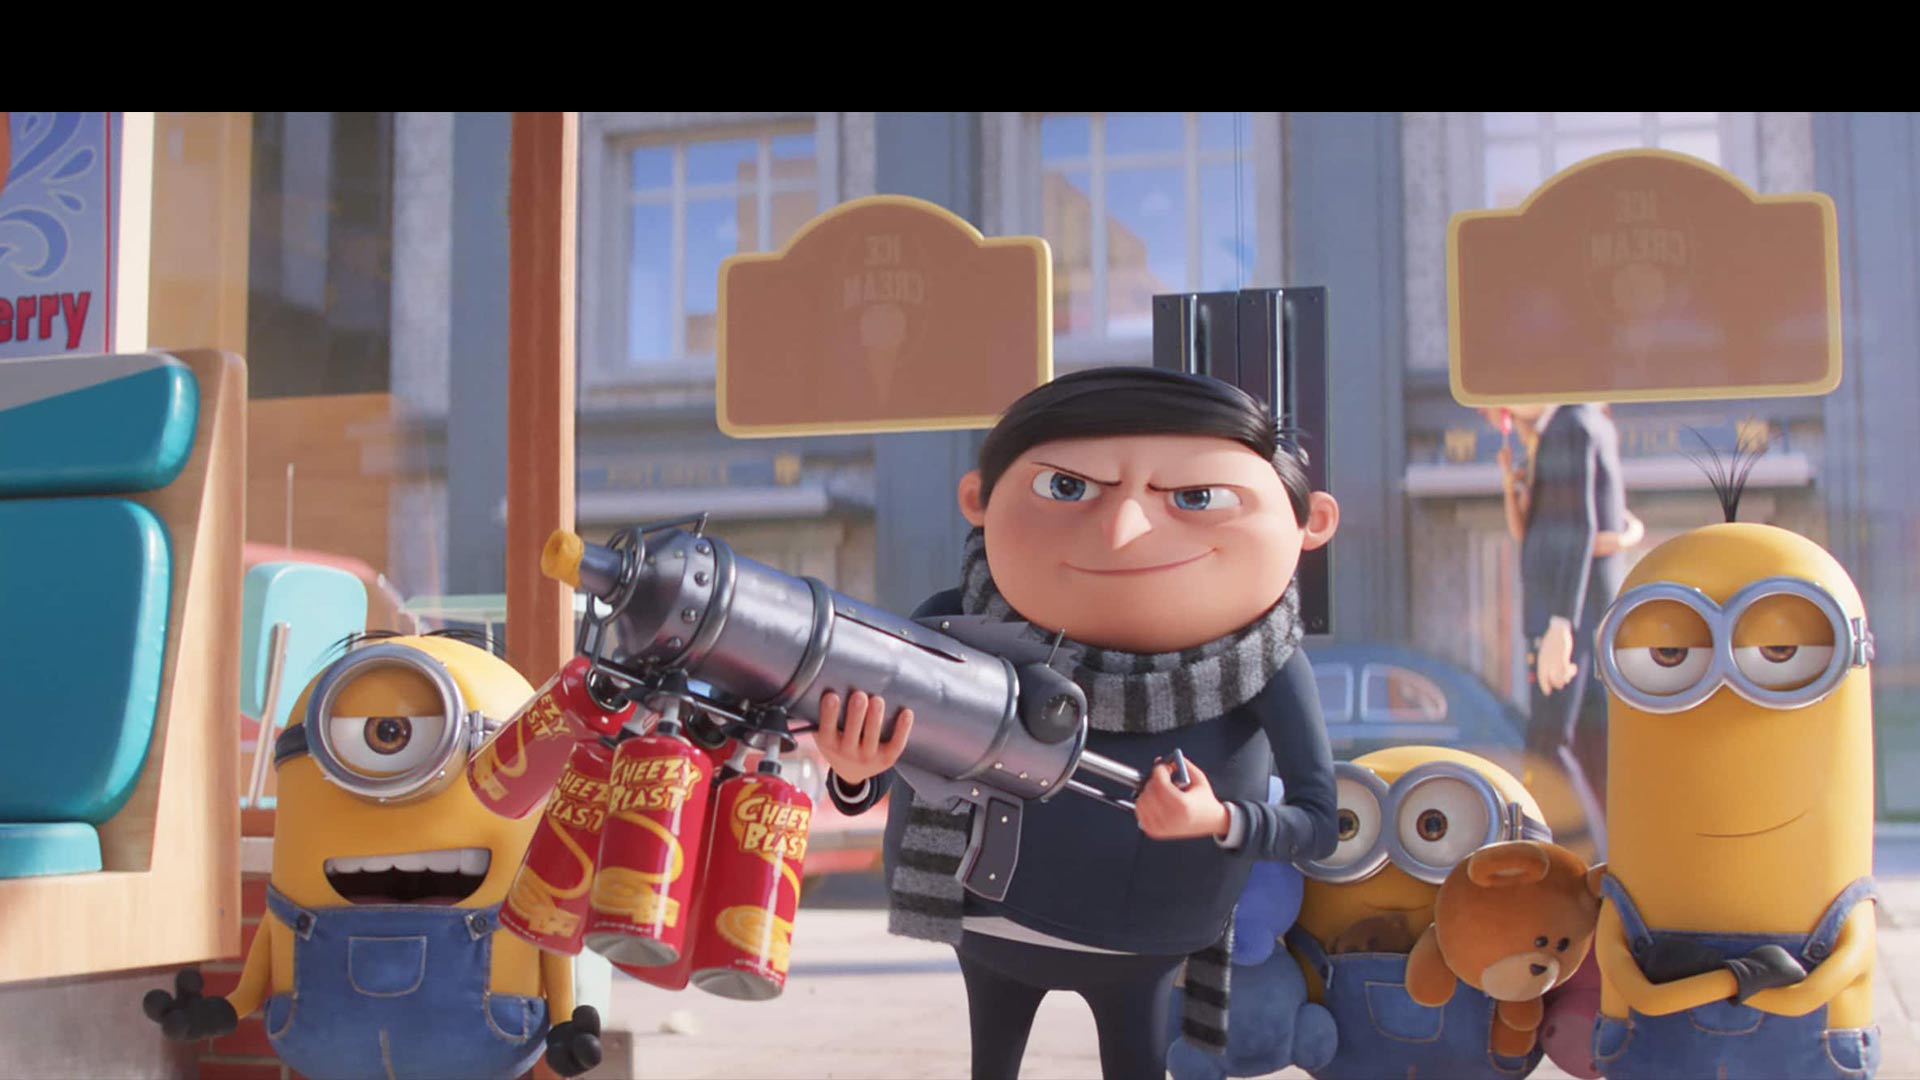 Minions: The Rise of Gru backdrop